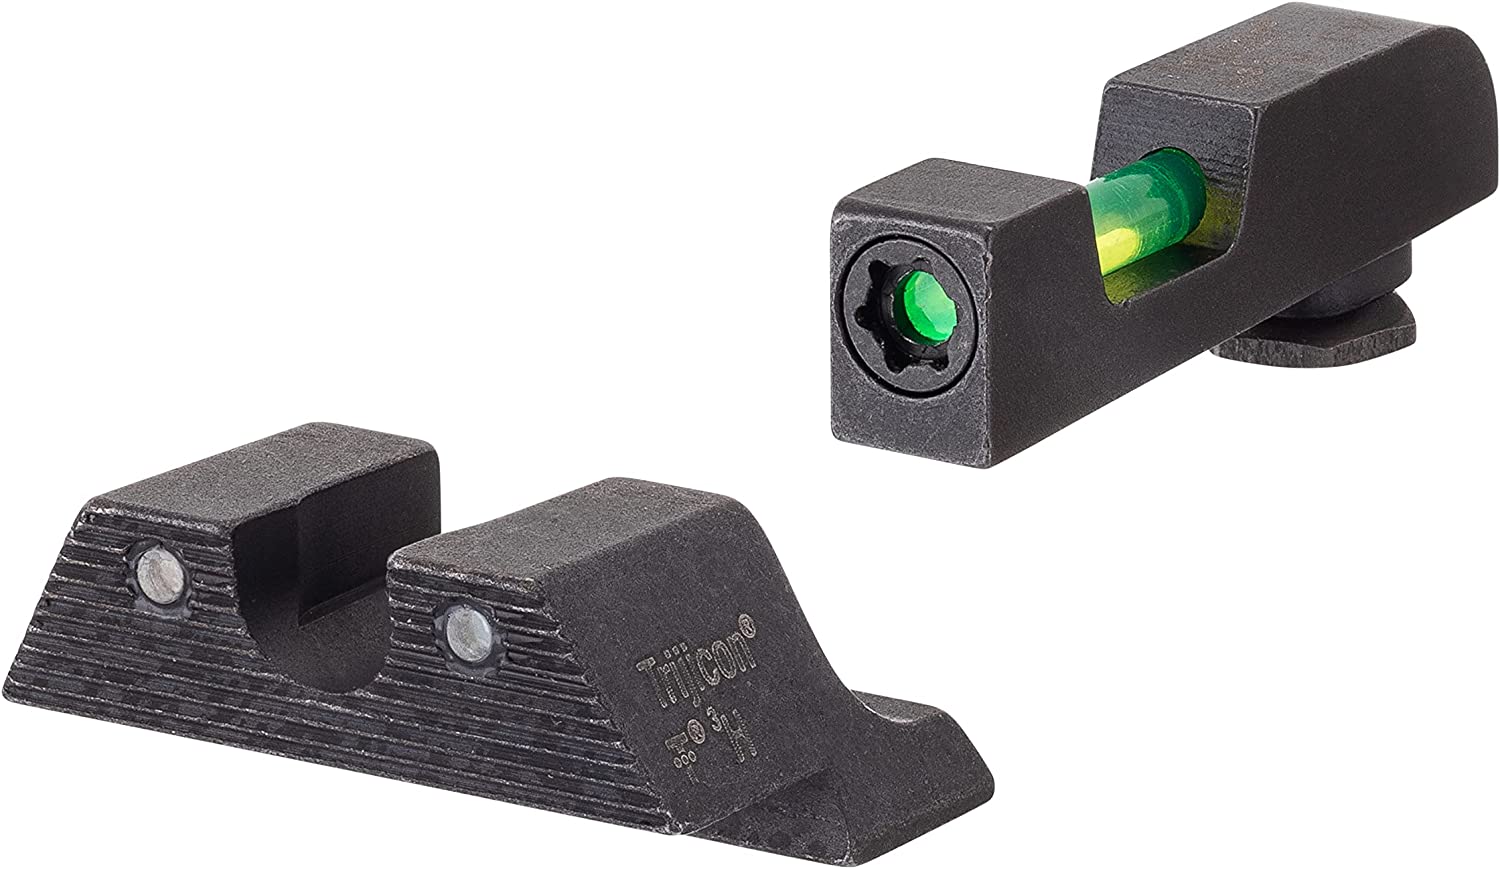 Trijicon DI SIghts Review: Pros and cons of the DI SIghts